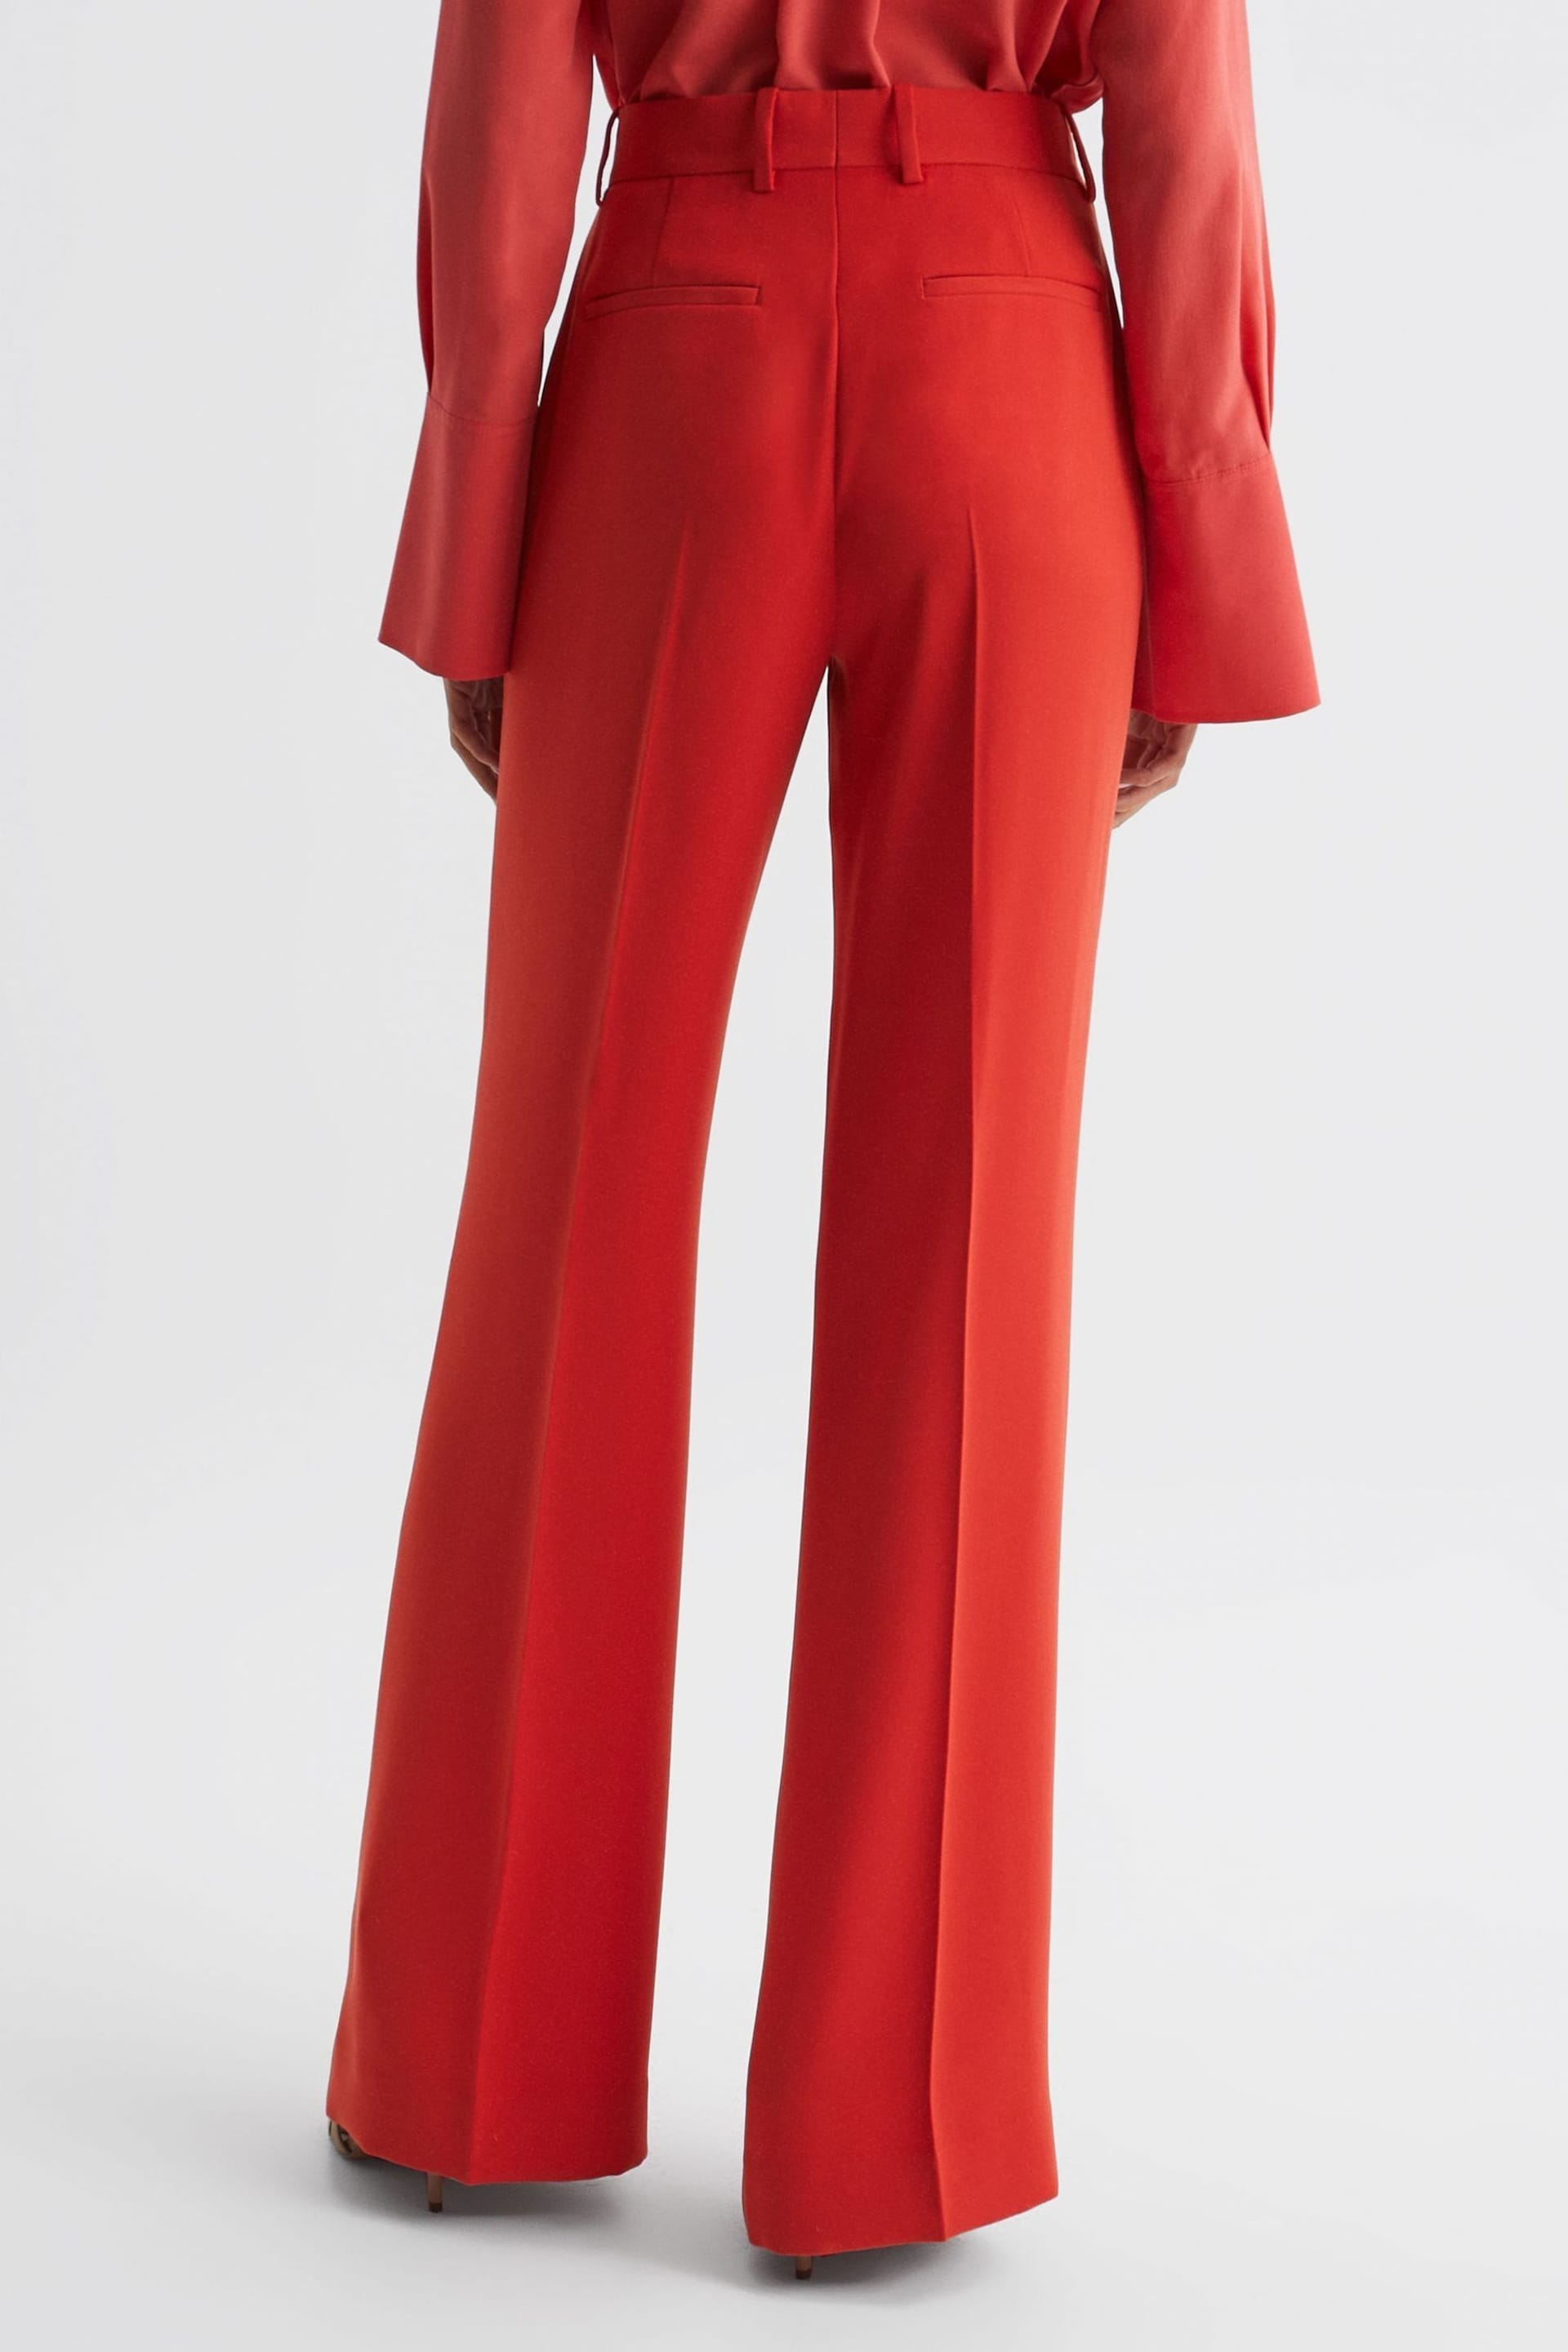 Reiss Coral Maia Wide Leg Trousers - Image 5 of 6